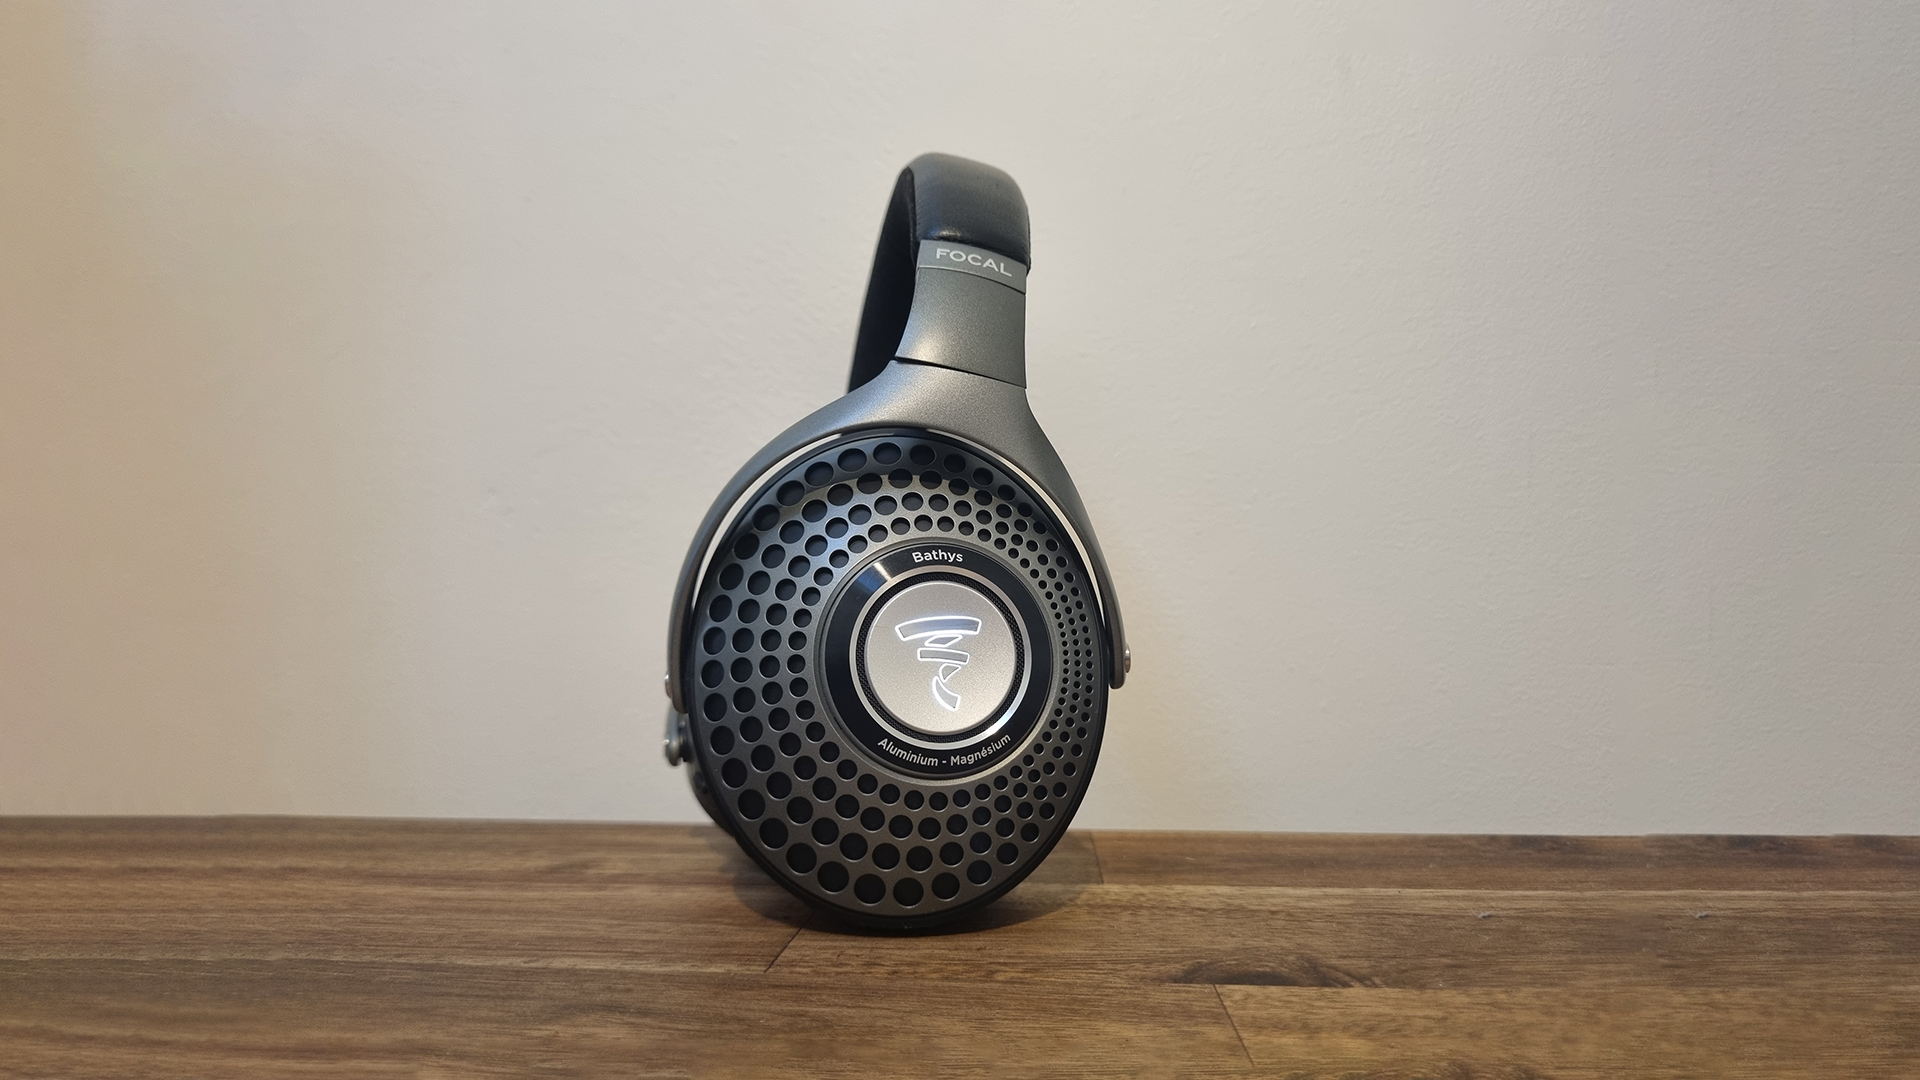 Focal Bathys review: Focal blends Bluetooth into its high-end